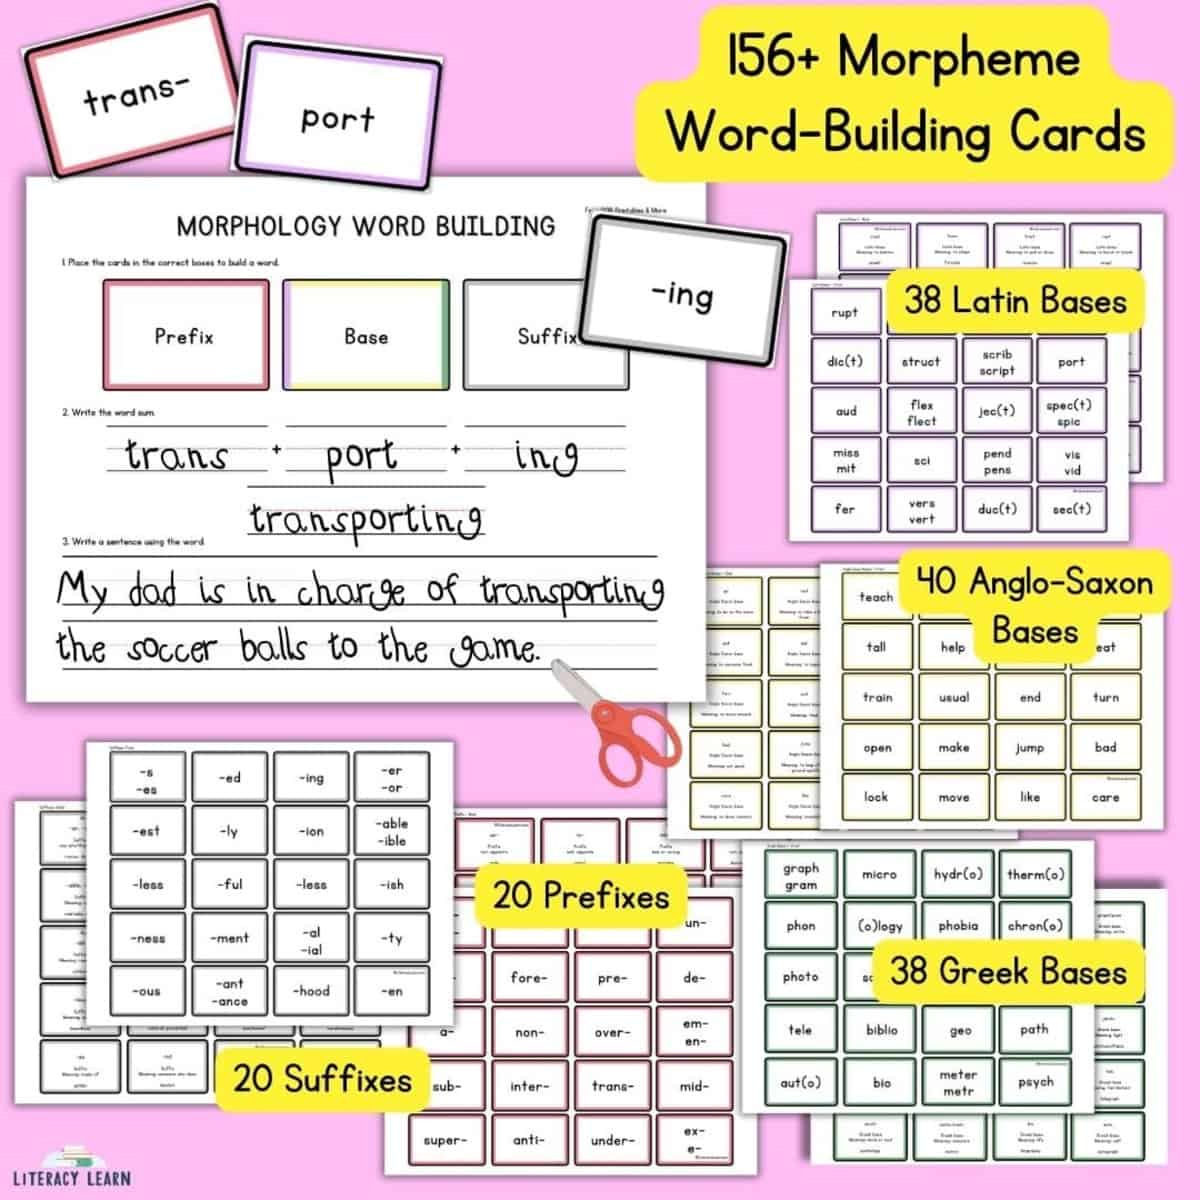 Graphic for expanded word building morphology resource with 156 morpheme cards.